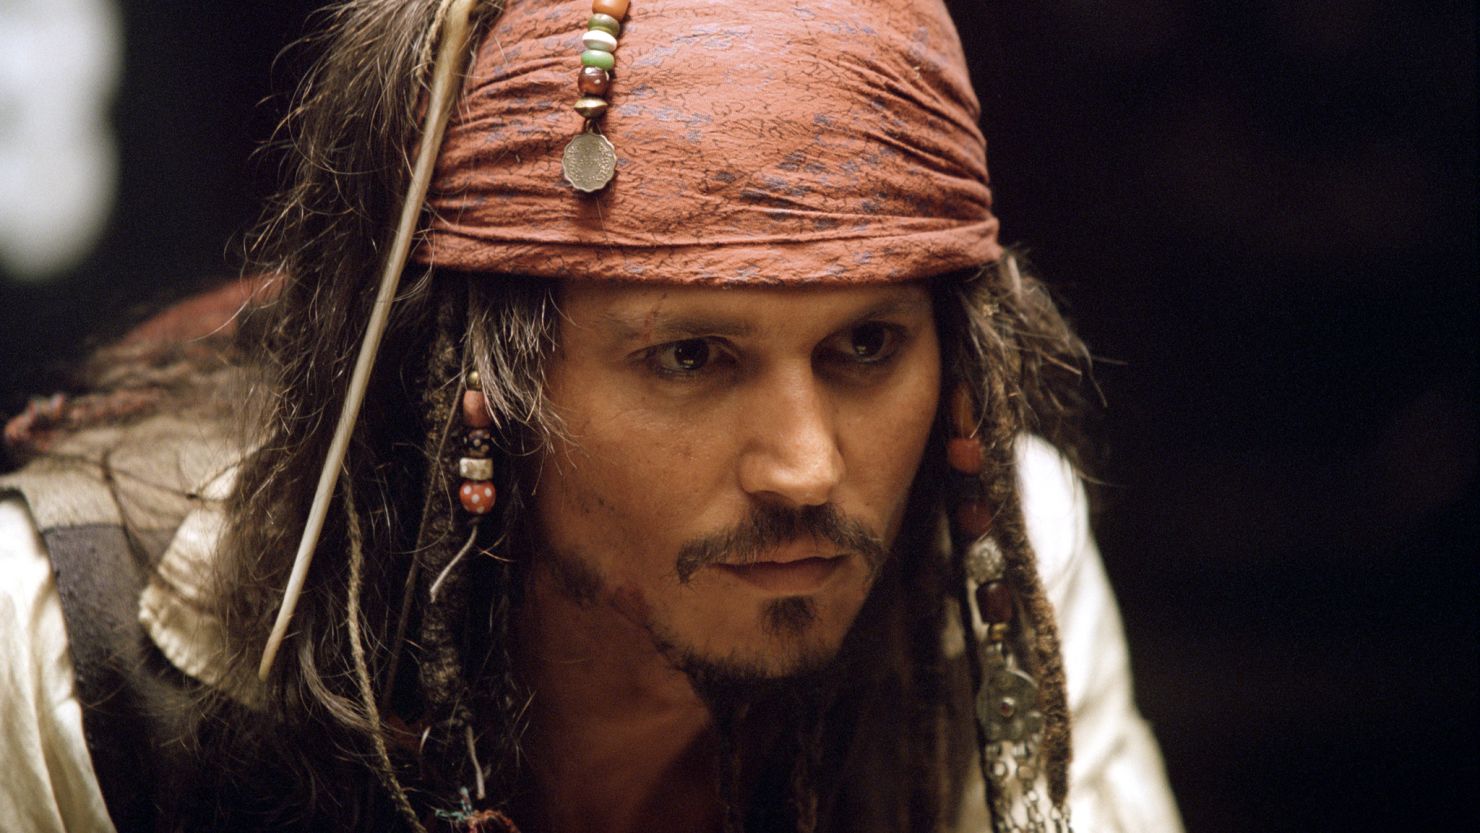 Johnny Depp has starred in all of the "Pirates of the Caribbean" films. 